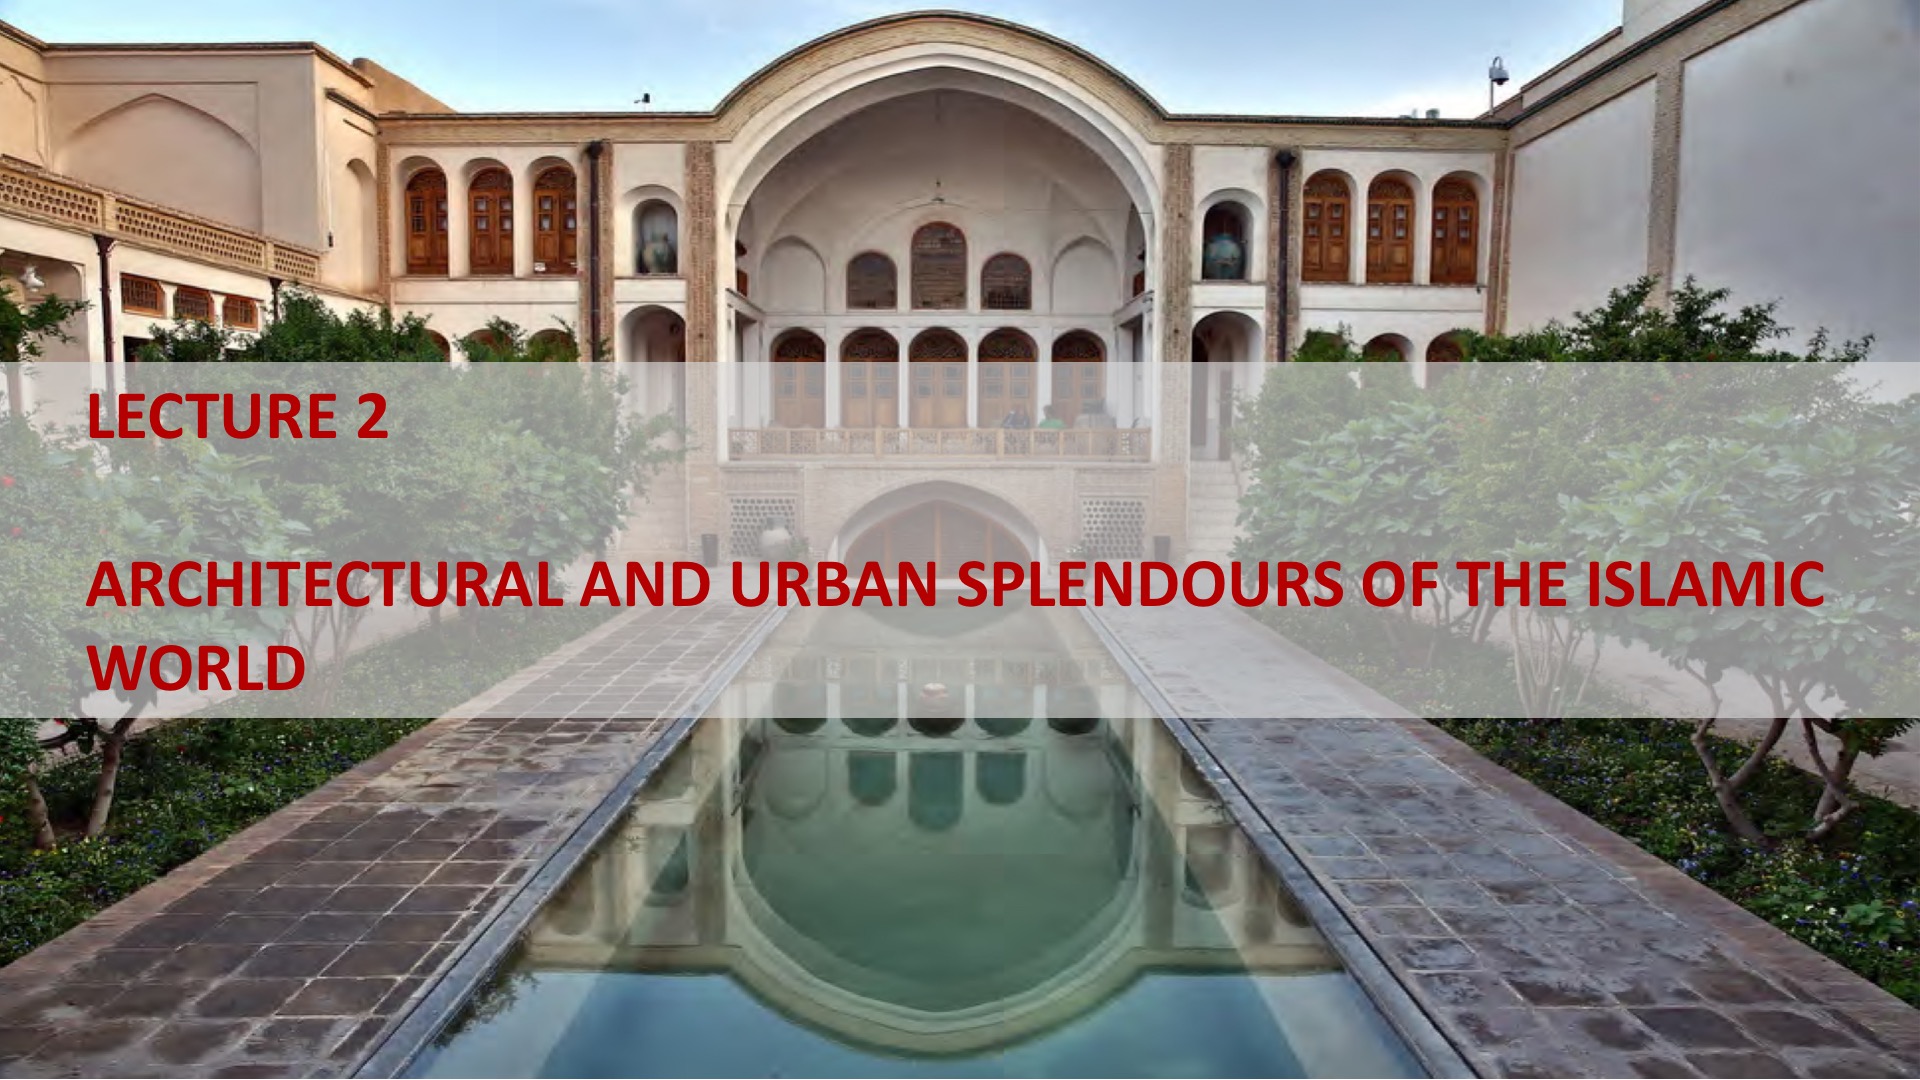  Centre for the Study of Architecture and Cultural Heritage of India, Arabia and the Maghreb - <p>In this lecture you will learn about:</p><ul><li>methods of interventions on existing buildings and urban spaces for the enhancement of their historic significance;</li><li>relevance of architectural qualities and urban characteristics of Islamic built environments to contemporary design;</li><li>restoration and adaptive reuse of key buildings in Iran, Qatar and Oman;</li><li>local architectural characteristics in comparison to high end Islamic architecture.</li></ul>